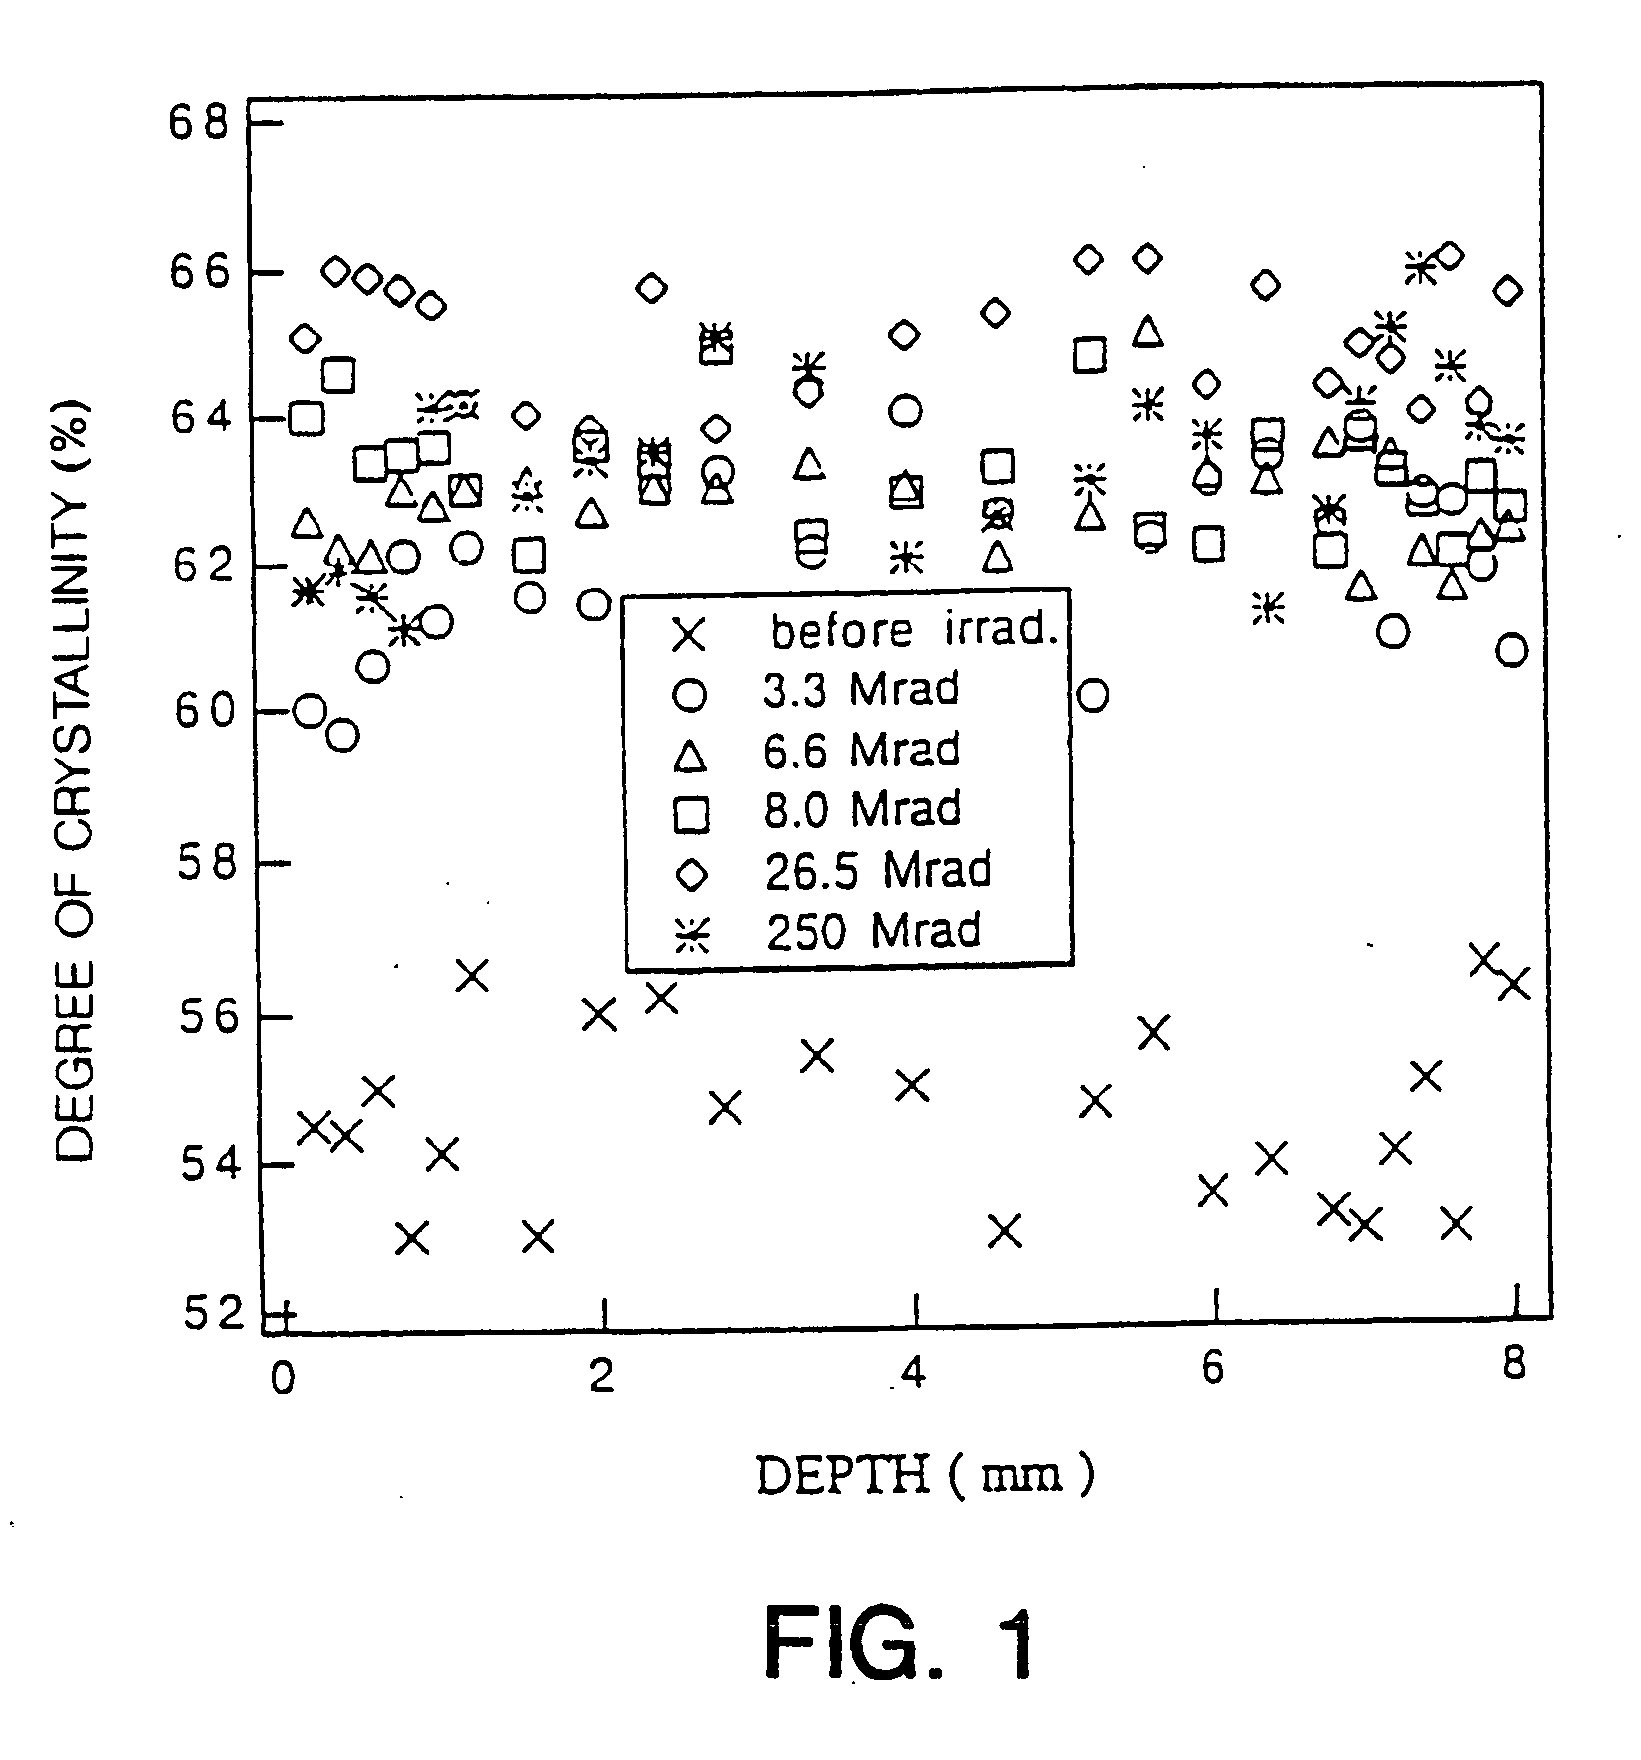 Crosslinking of polyethylene for low wear using radiation and thermal treatments